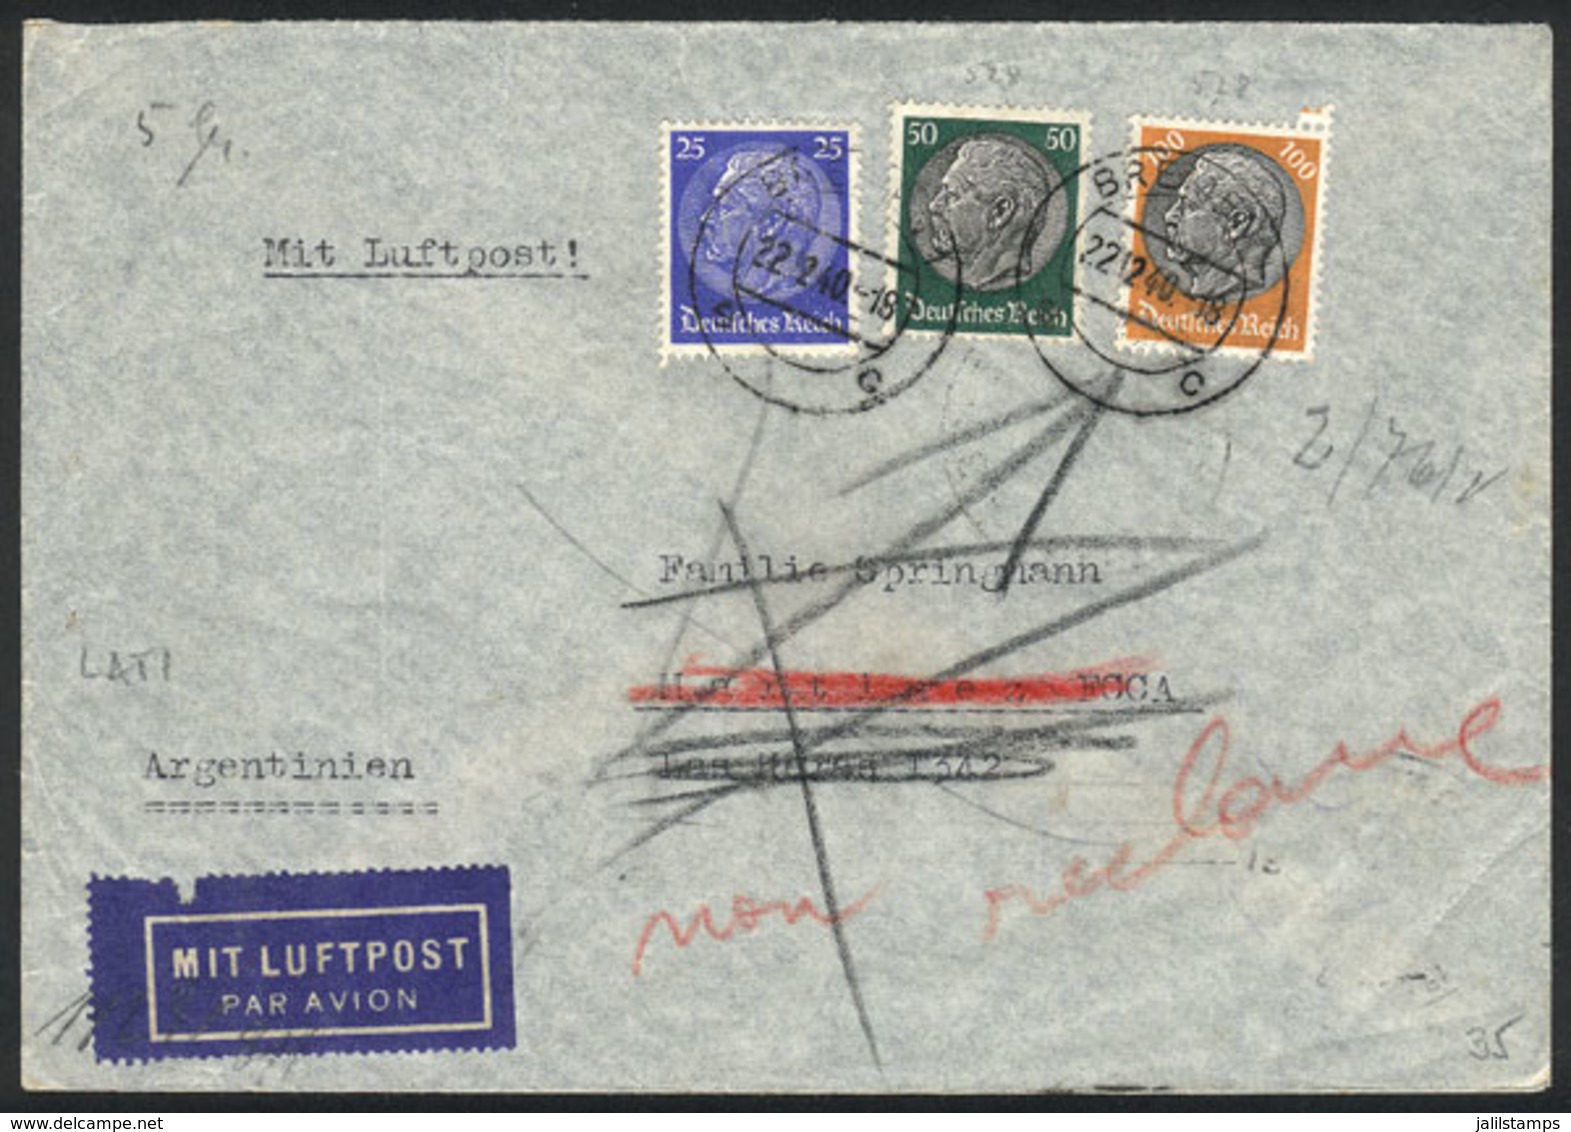 GERMANY: Airmail Cover Sent From Bremen To Buenos Aires On 22/DE/1940 Franked With 1.75Mk., Nazi Censor Label On Back, R - Prefilatelia